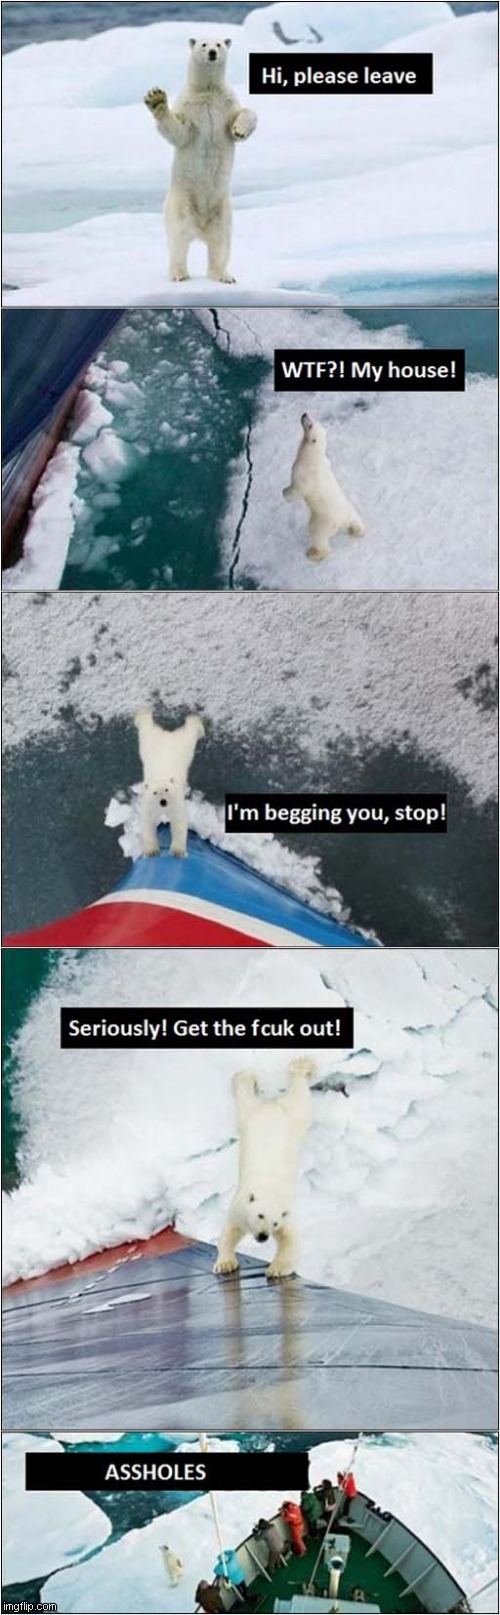 That's One Angry Polar Bear | image tagged in polar bear,angry,ice breaker,dark humour | made w/ Imgflip meme maker